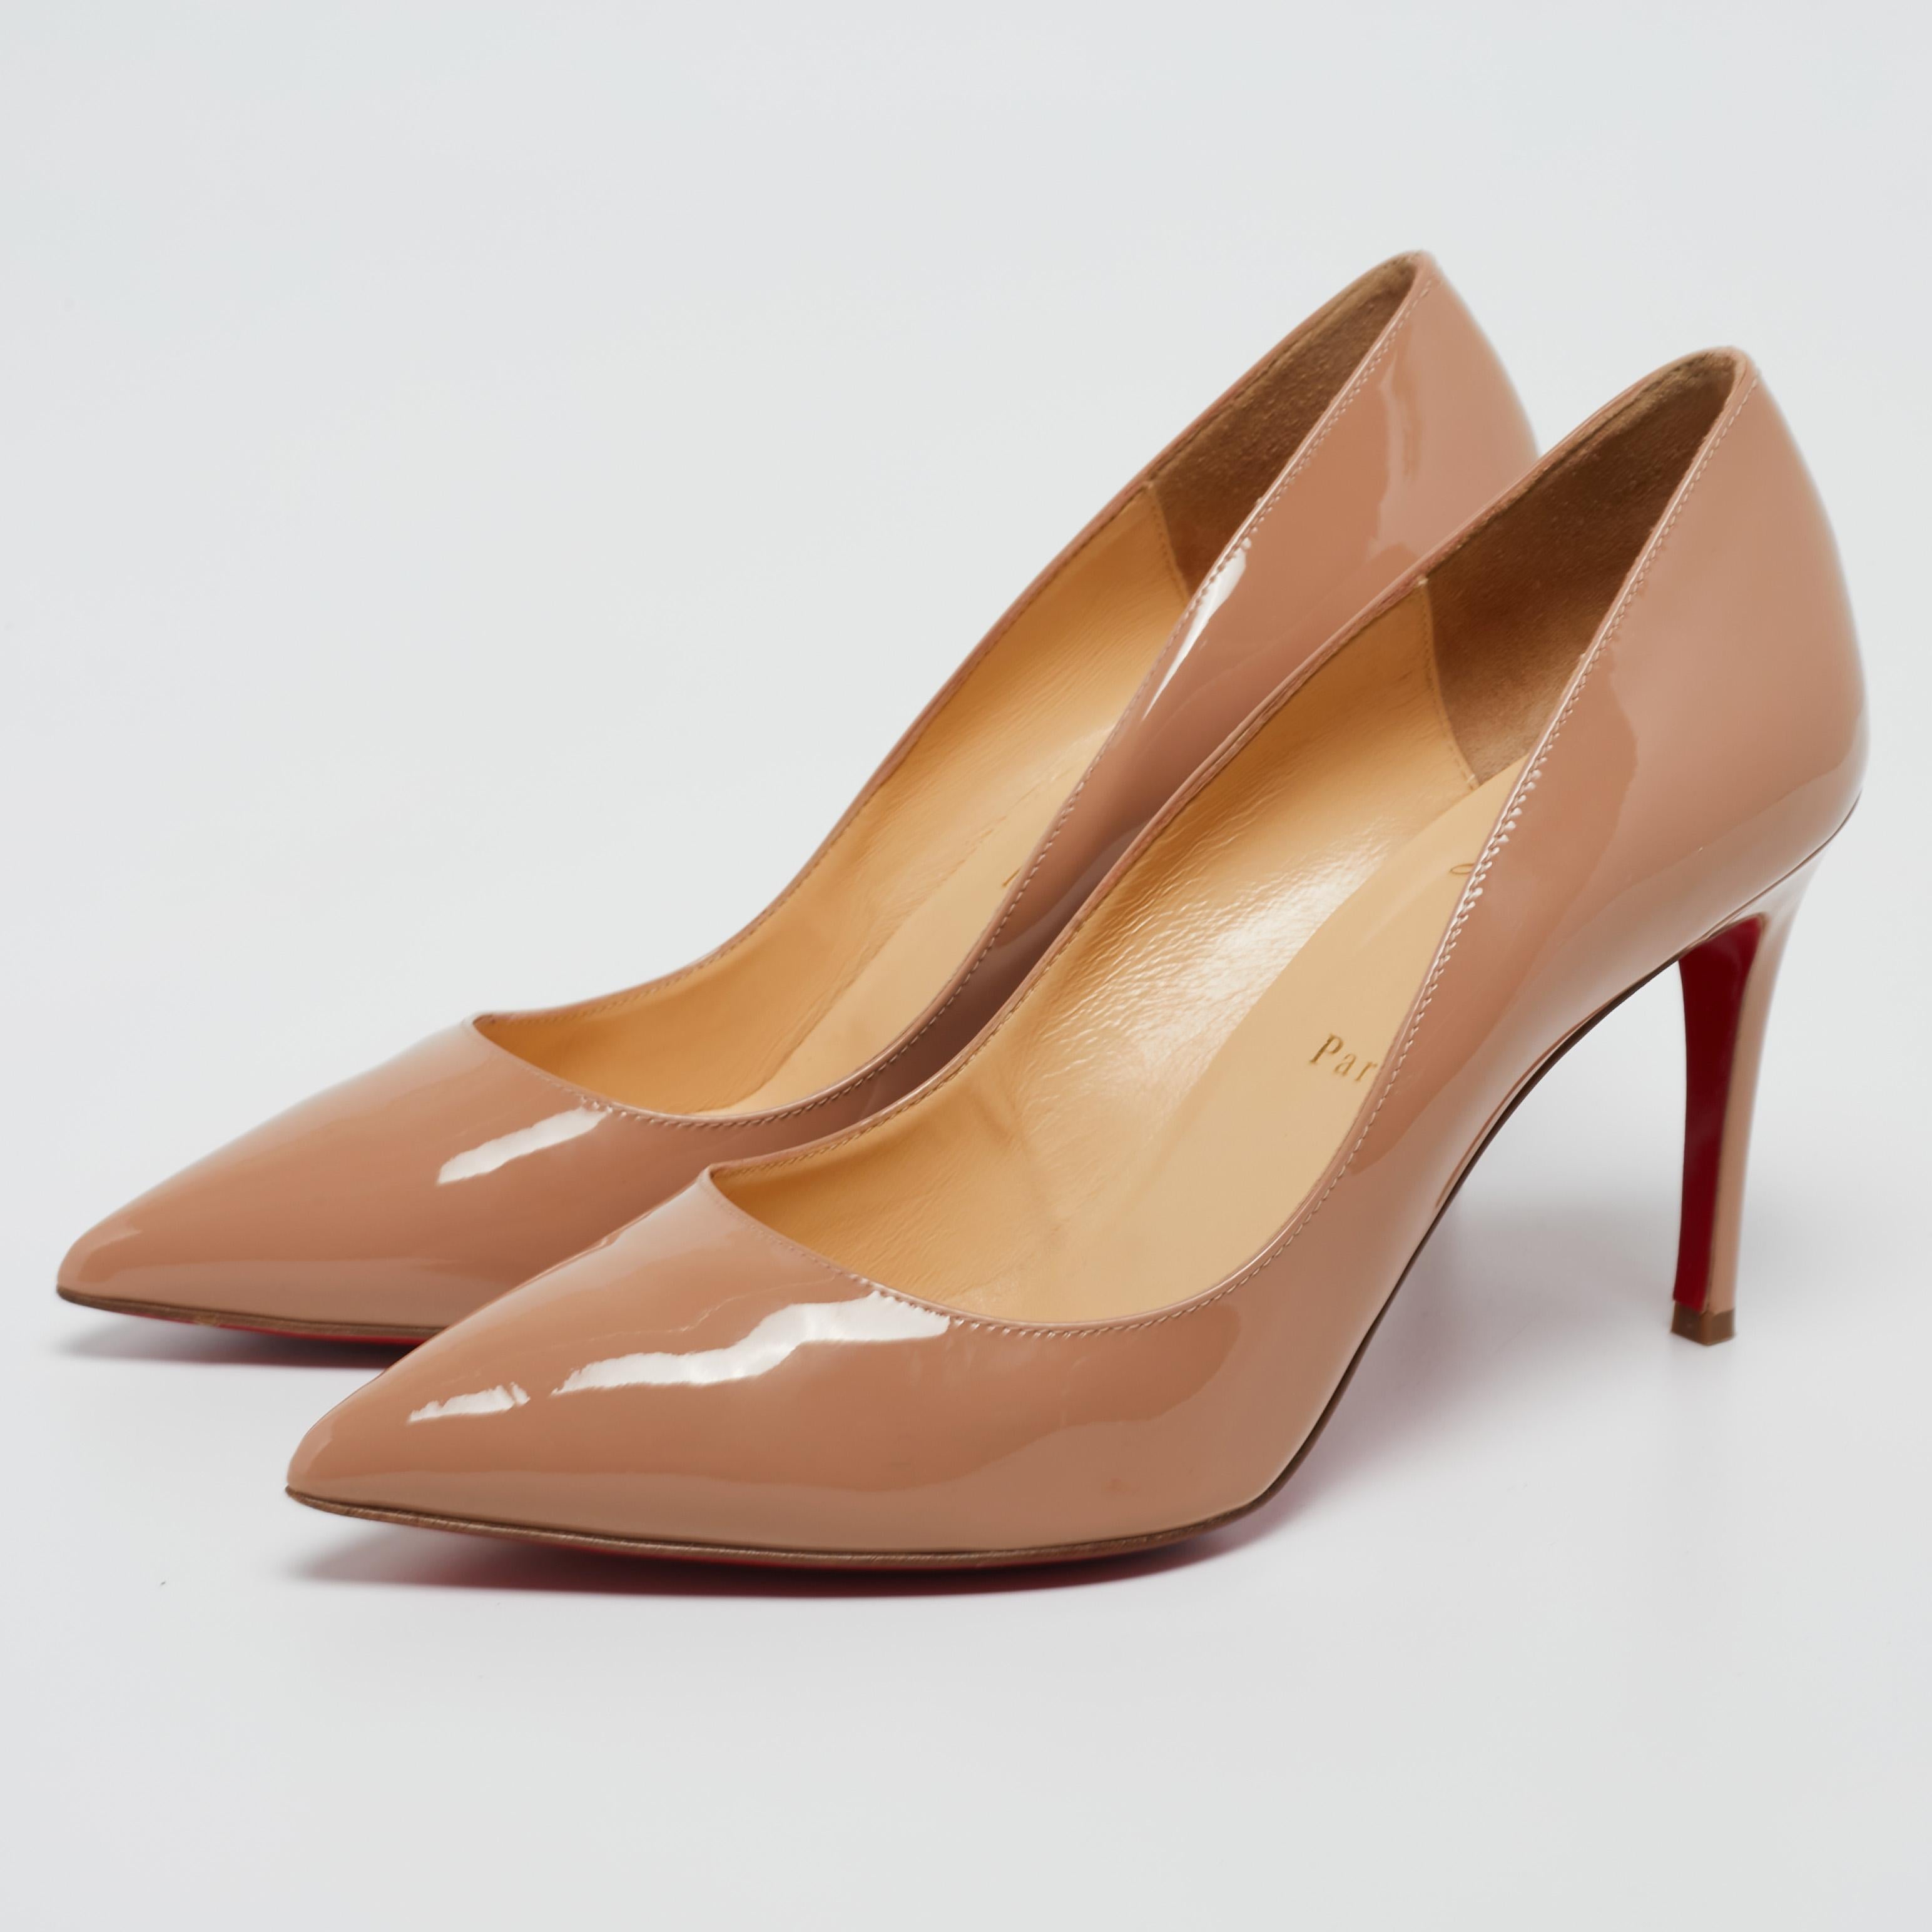 Invest in a classic pair of beige pumps by choosing this Christian Louboutin design. Crafted from patent leather, these pumps carry a sleek shape with pointed toes and 9 cm heels. Complete with the signature red soles, this pair embodies the fine